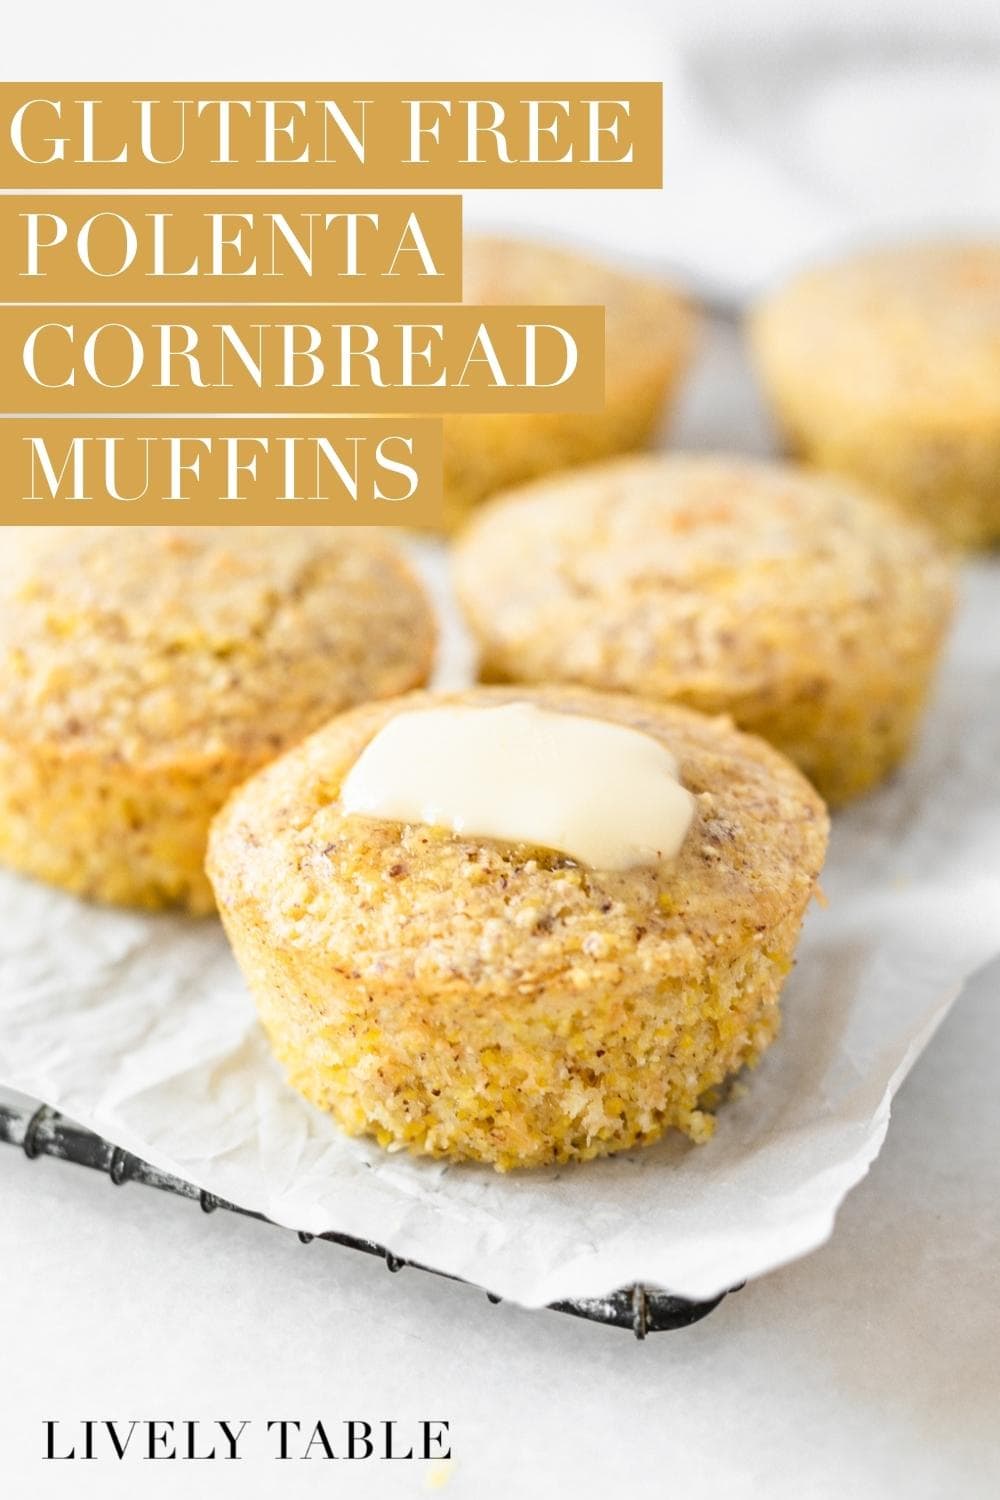 Gluten Free Cornbread Muffins With Polenta - Lively Table